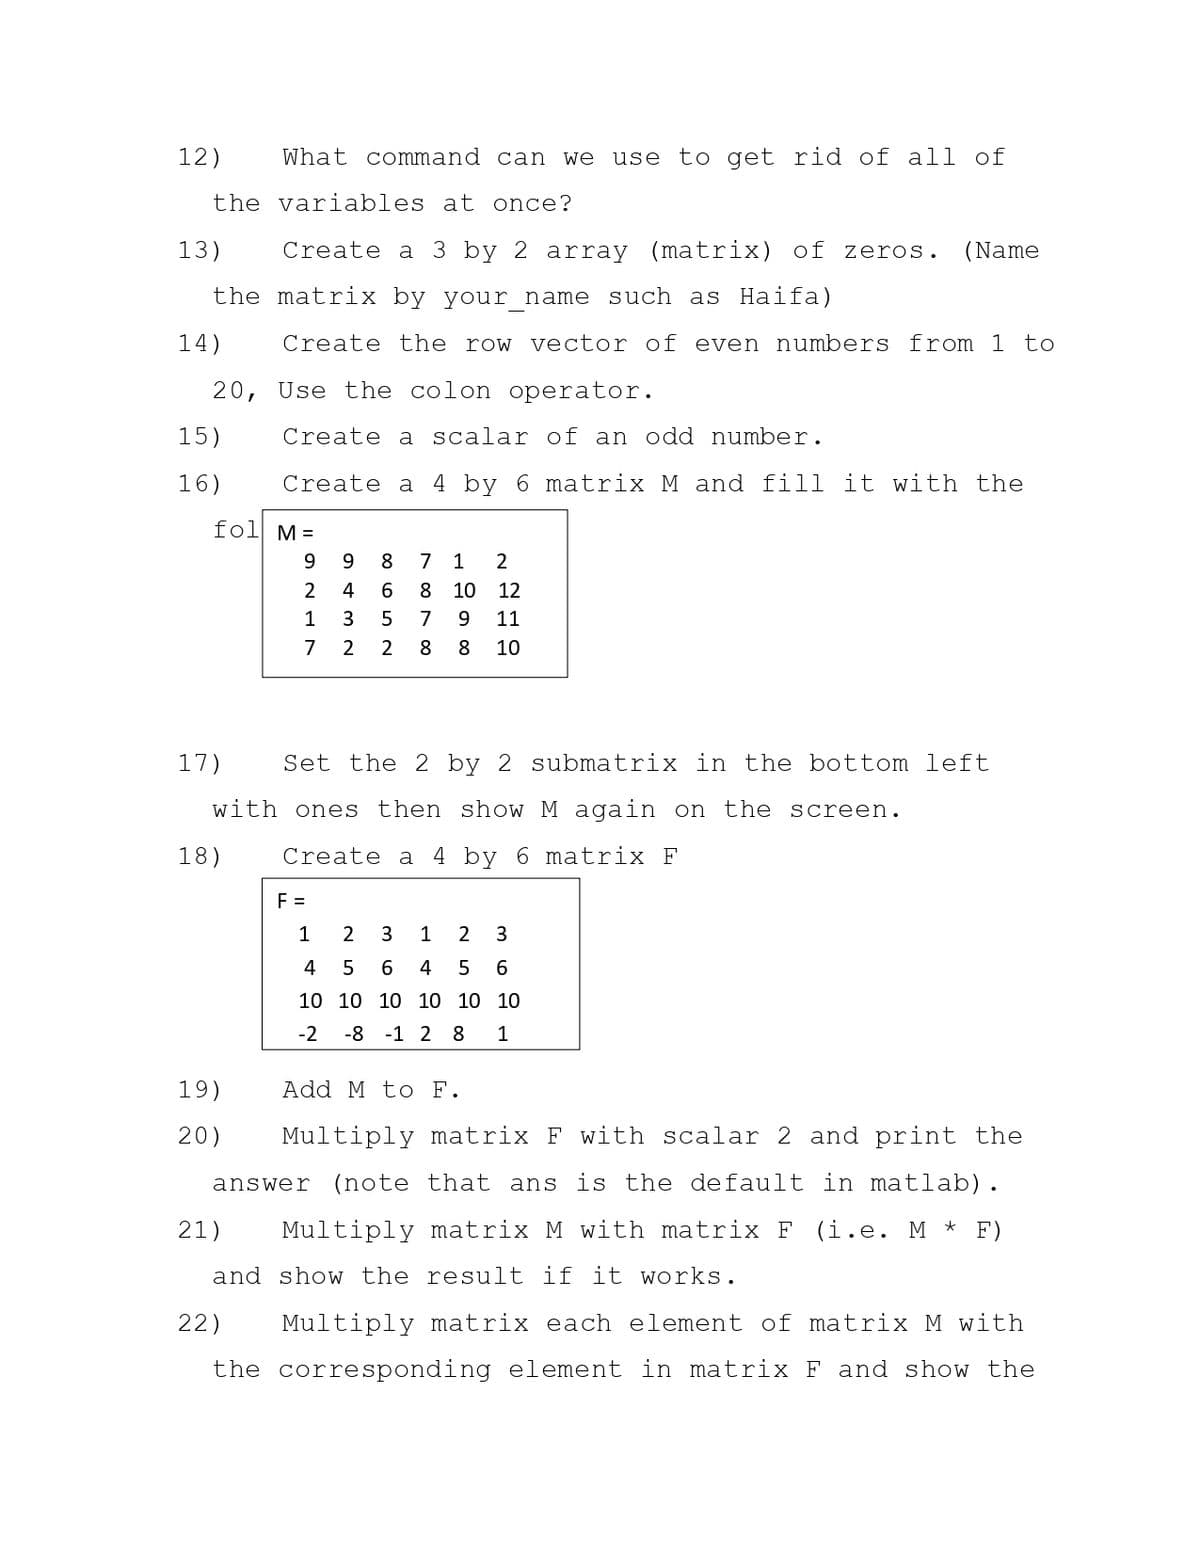 12)
What command can we
use to get rid of all of
the variables at once?
13)
Create a 3 by 2 array (matrix) of zeros.
(Name
the matrix by your name such as Haifa)
14)
Create the row vector of even numbers from 1 to
20, Use the colon operator.
15)
Create a
alar of
an
dd
mber.
16)
Create a 4 by 6 matrix M and fill it with the
fol M =
9.
9.
8
7
1
2
2
4
6.
8
10
12
1
3
5
7
9.
11
7 2
2
8
8
10
17)
Set the 2 by 2 submatrix in the bottom left
with ones then show M again on the screen.
18)
Create a 4 by 6 matrix F
F =
1
2
3
1
2
4
4
5
6.
10 10 10 10 10 10
-2
-8 -1 2 8
1
19)
Add M to F.
20)
Multiply matrix F with scalar 2 and print the
(note that ans is the default in matlab).
answer
21)
Multiply matrix M with matrix F (i.e. M * F)
and show the result if it works.
22)
Multiply matrix each element of matrix M with
the corresponding element in matrix F and show the
